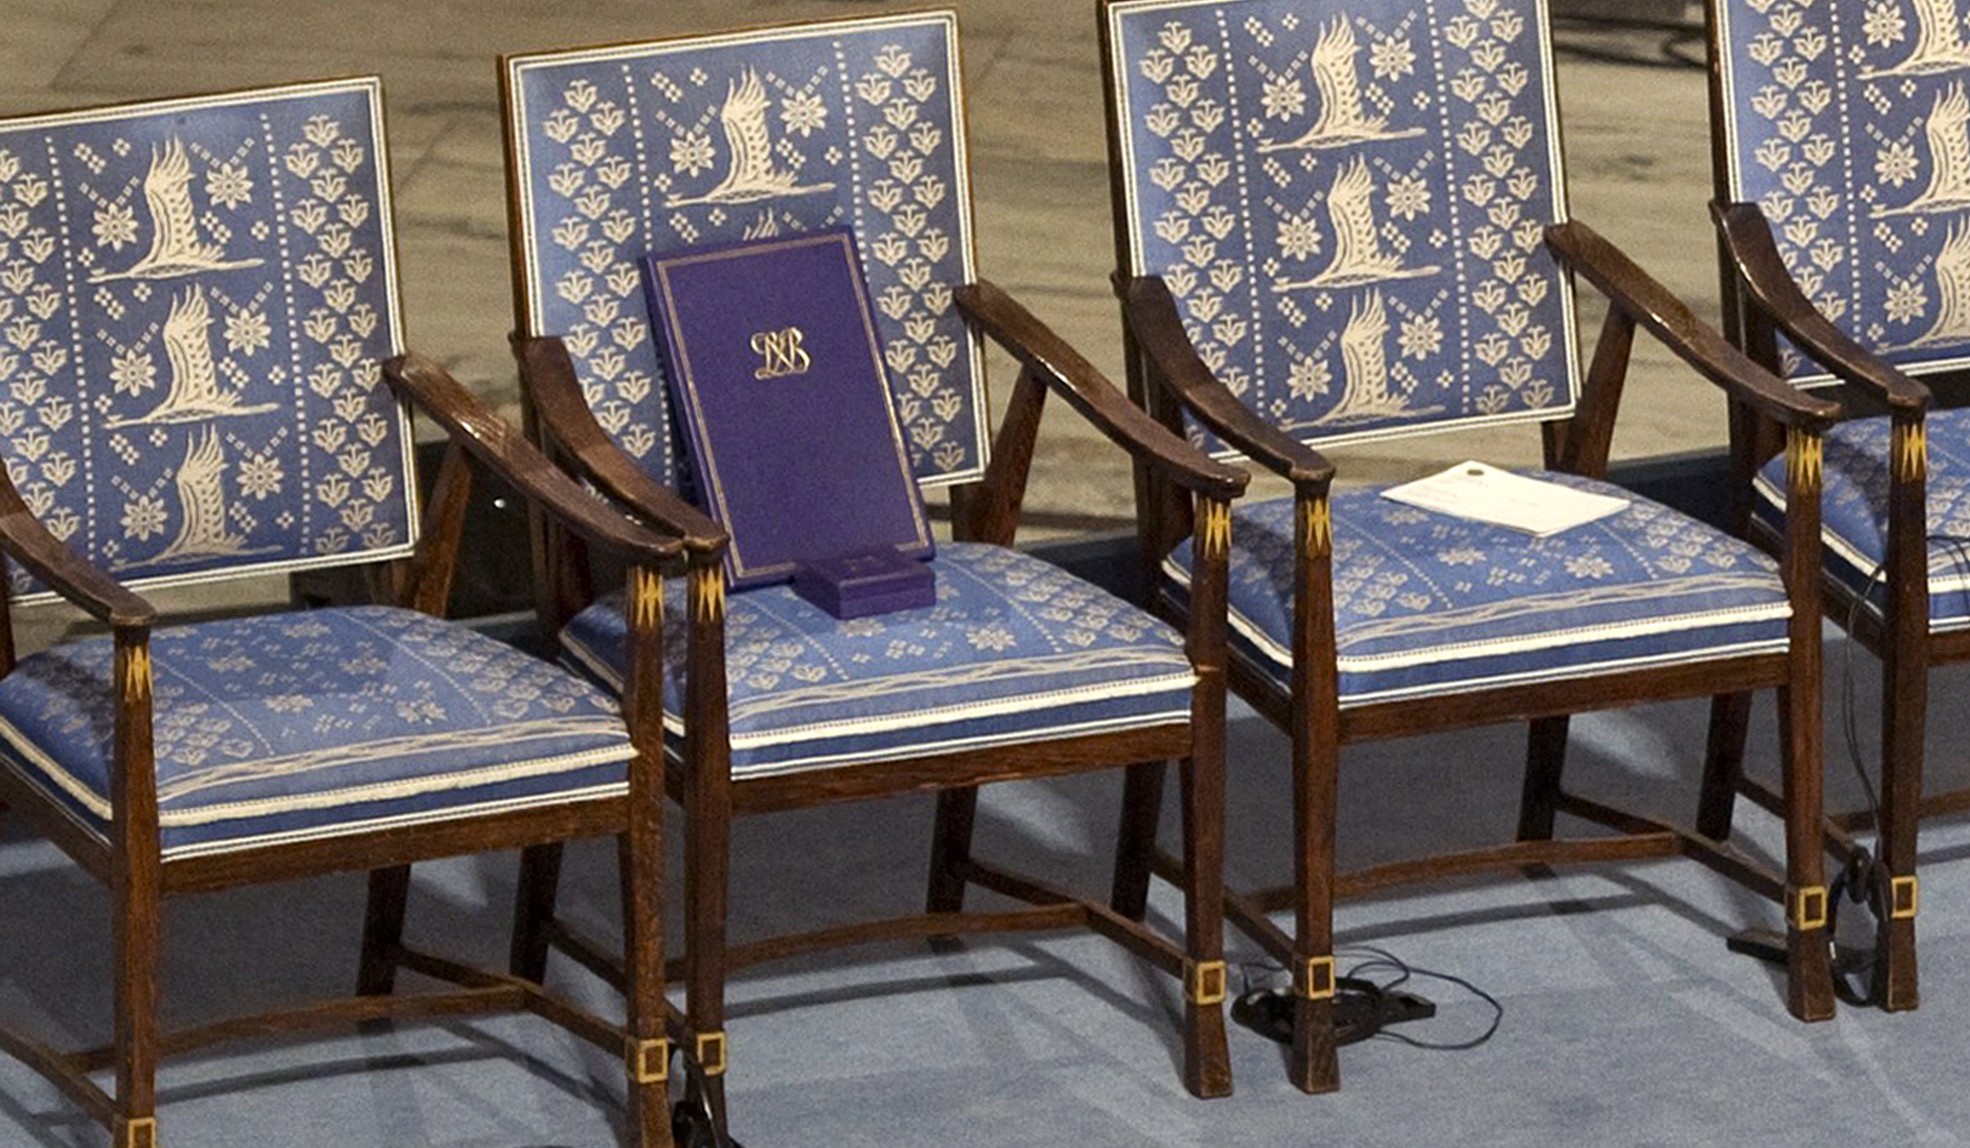 The Nobel Peace Prize medal and diploma meant for Chinese dissident Liu Xiaobo sit on an empty chair that he would have occupied, during the awards ceremony in Oslo in December 2010. Liu was at the time serving an 11-year prison term for inciting subversion of state power. Photo: AFP